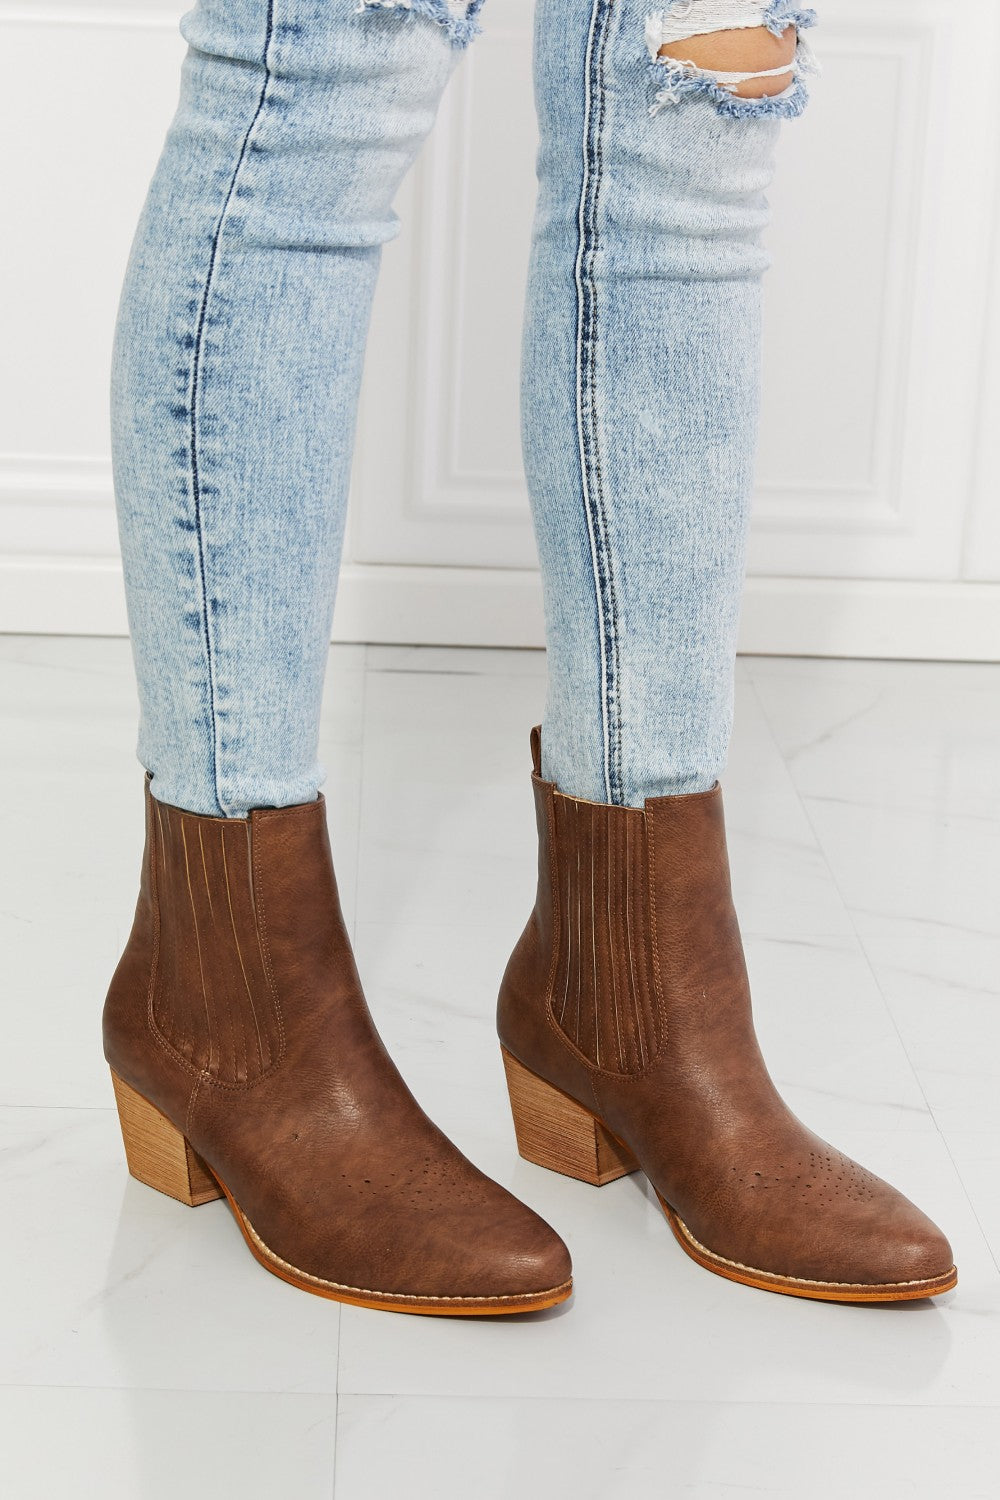 mmshoes-love-the-journey-stacked-heel-chelsea-boot-in-chestnut